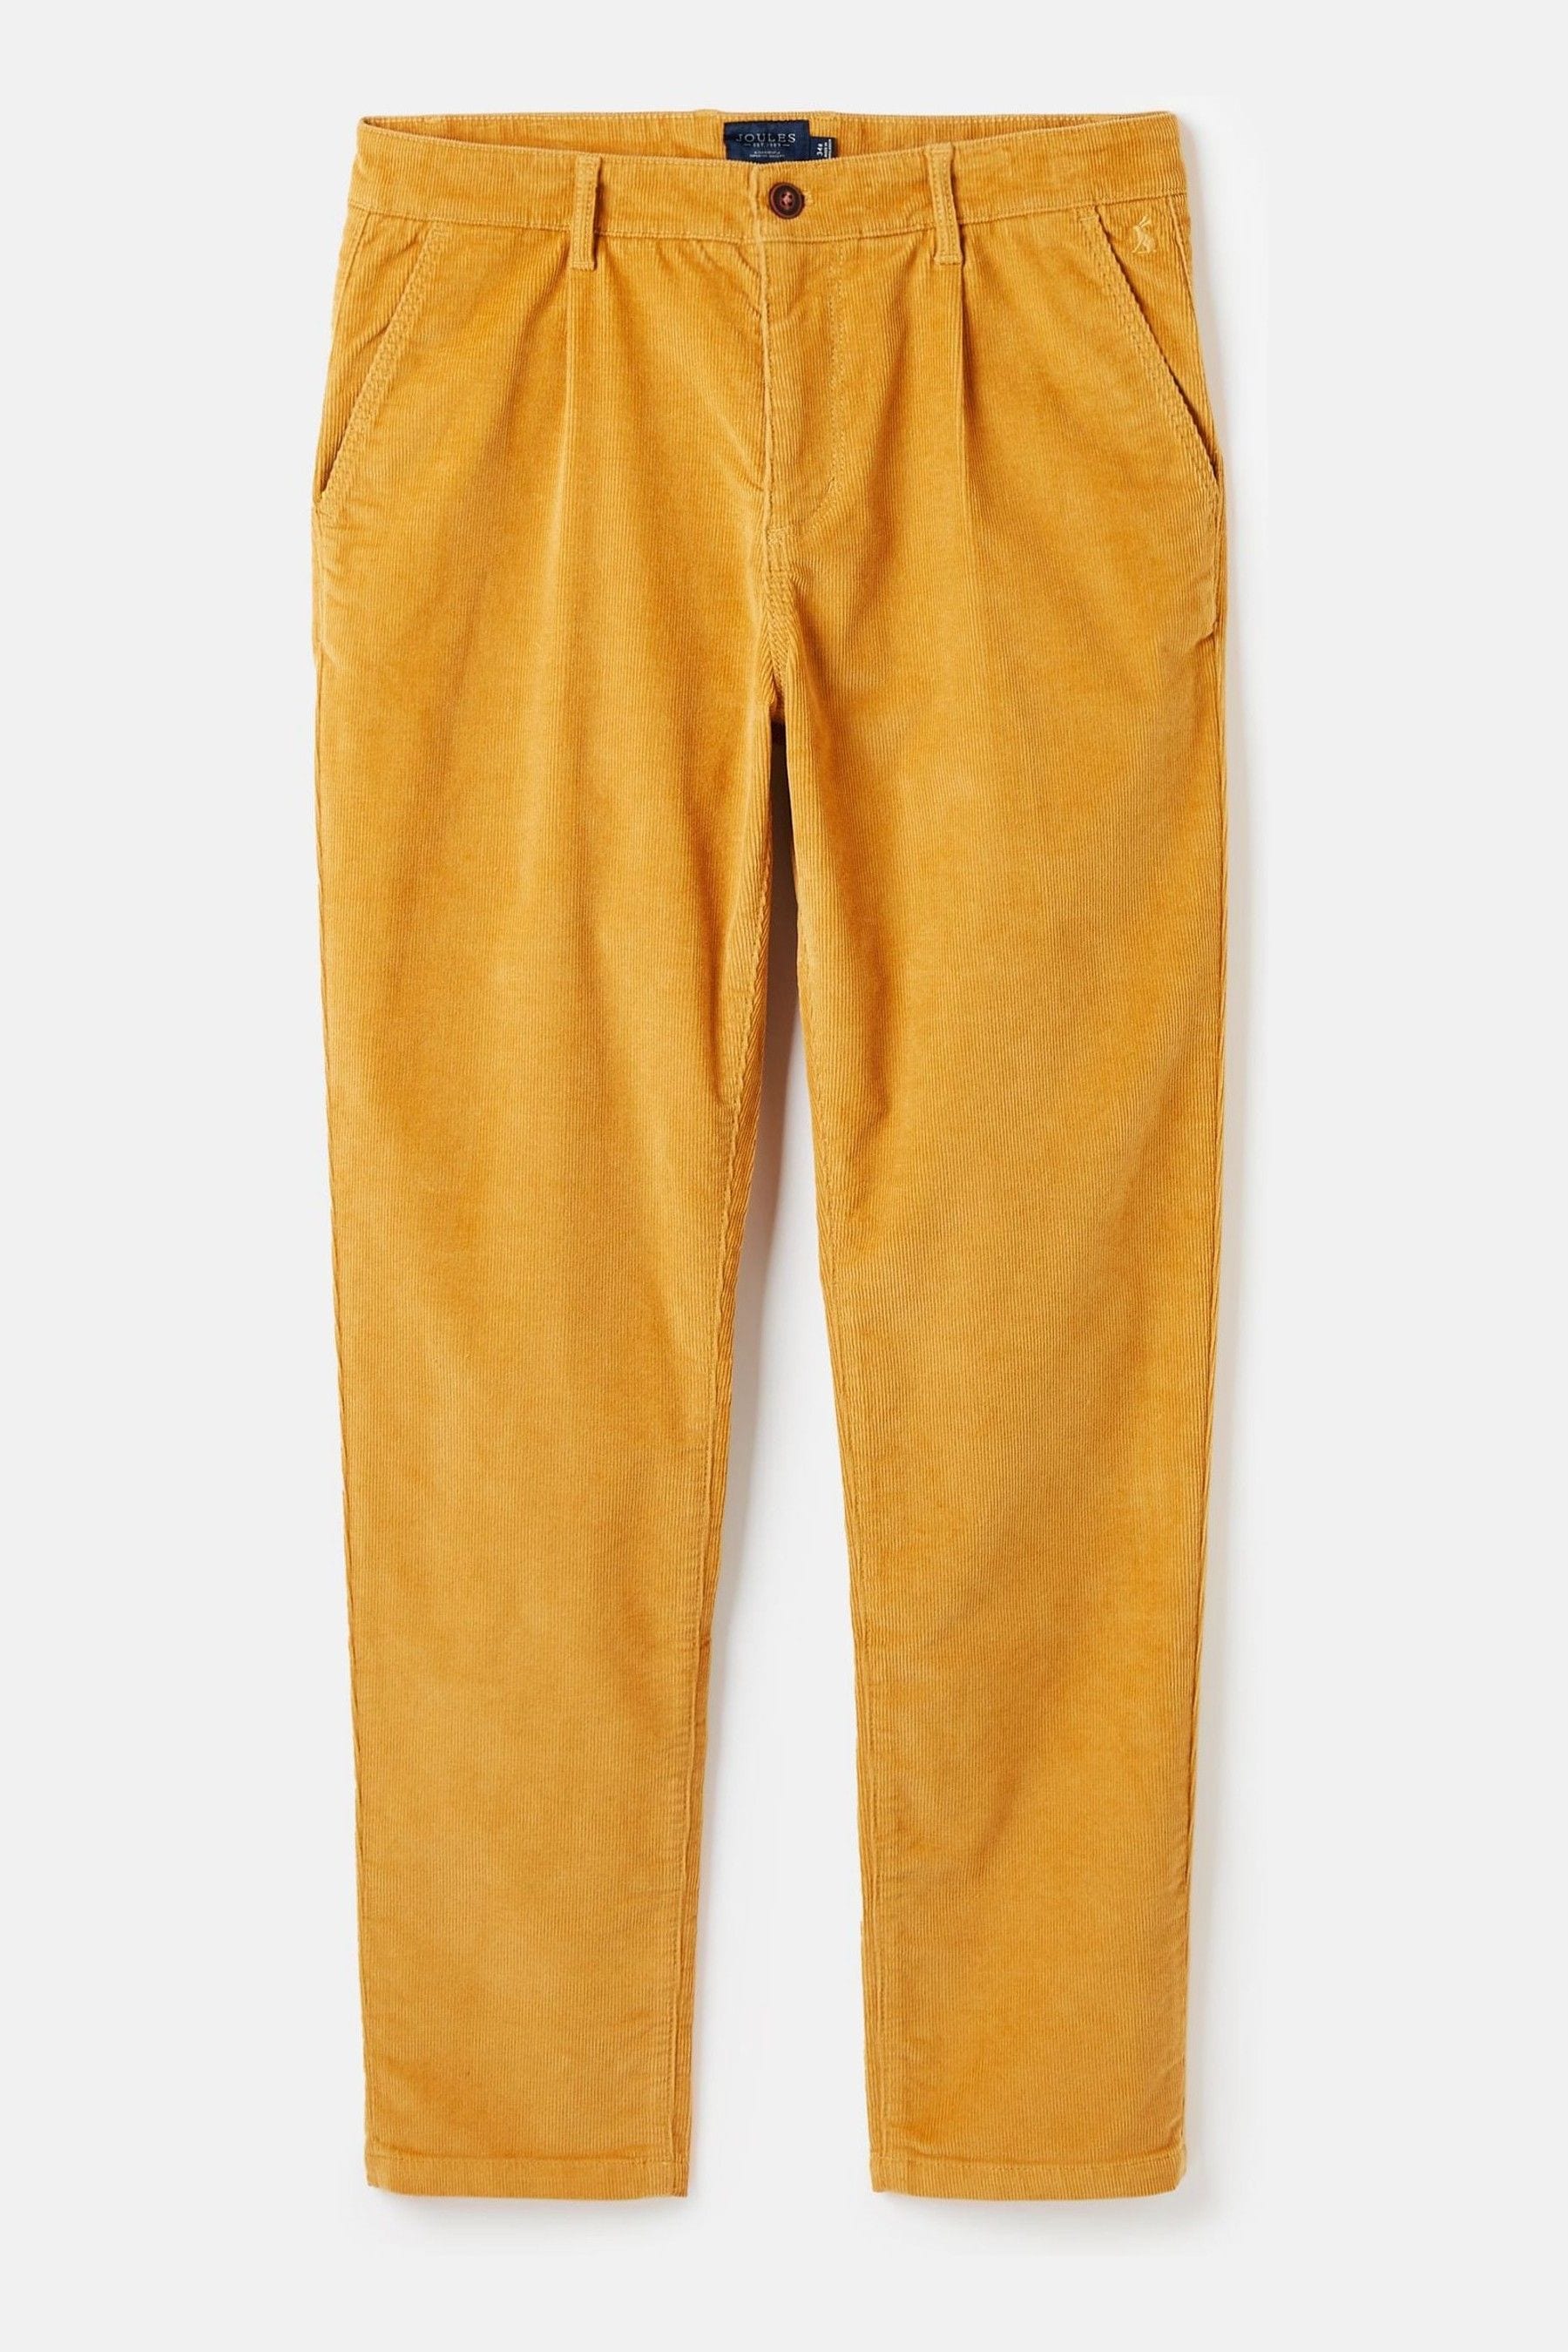 Buy Joules Cord Yellow Straight Leg Corduroy Trousers from the Next UK ...